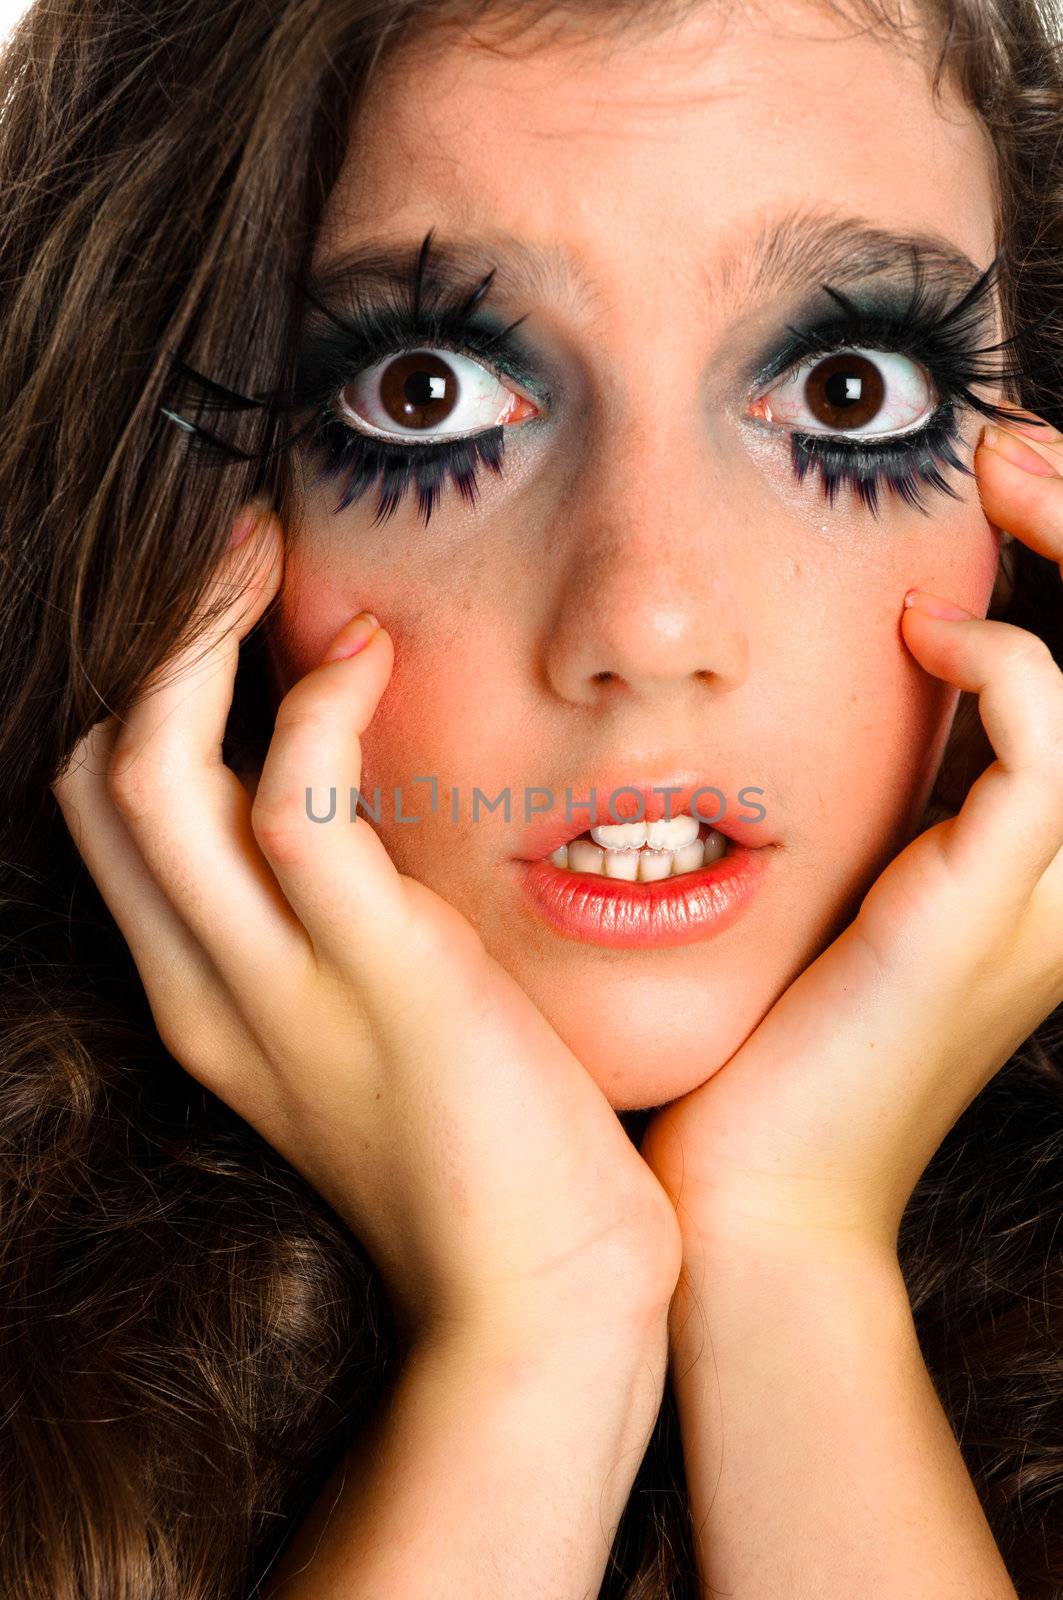 Terrified girl in extreme makeup by svedoliver